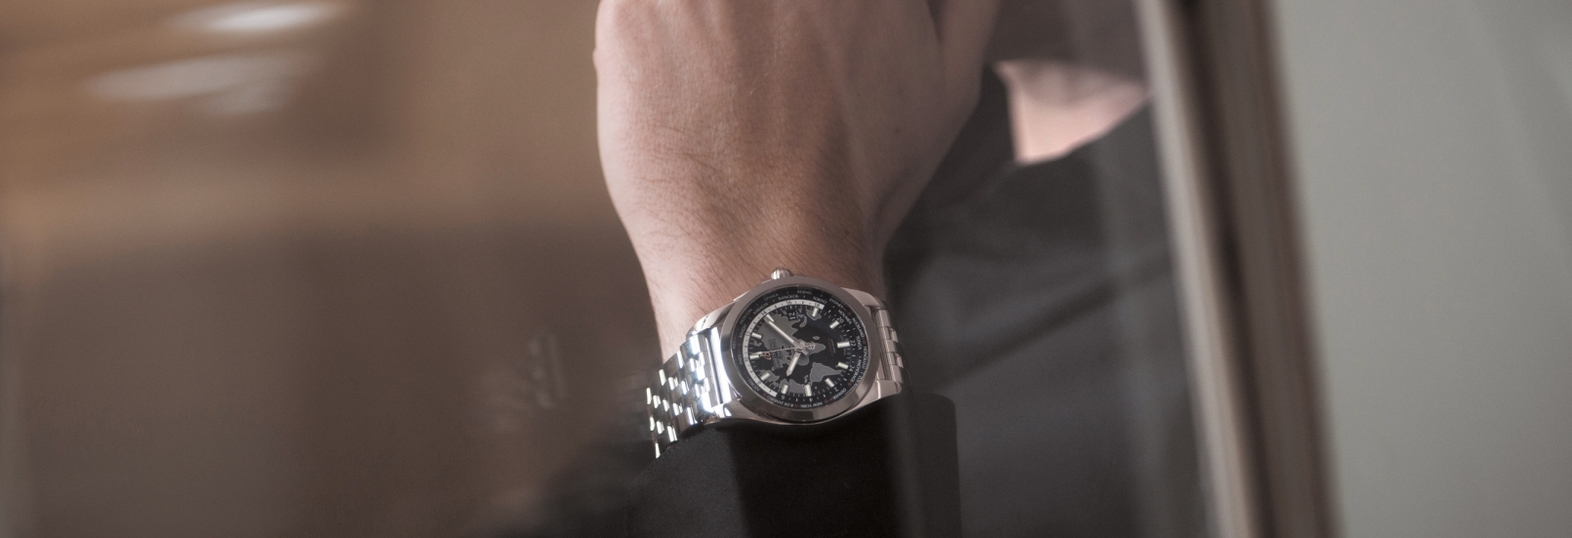 breitlingenz automatic world time watch Galaxy unit Celtifi hosts the timing